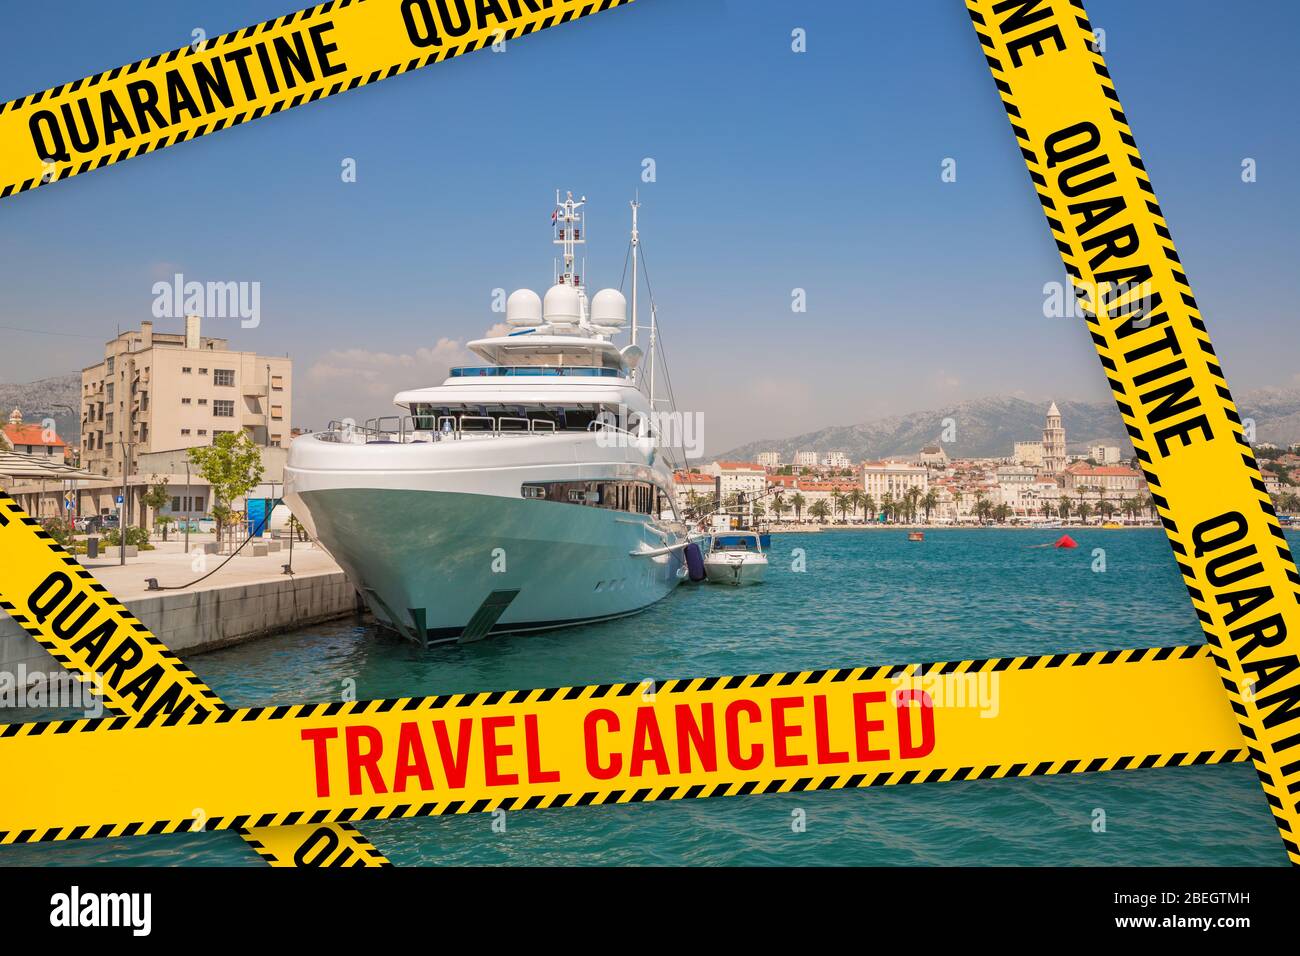 Cancellation of travel concept. Large yacht Stock Photo